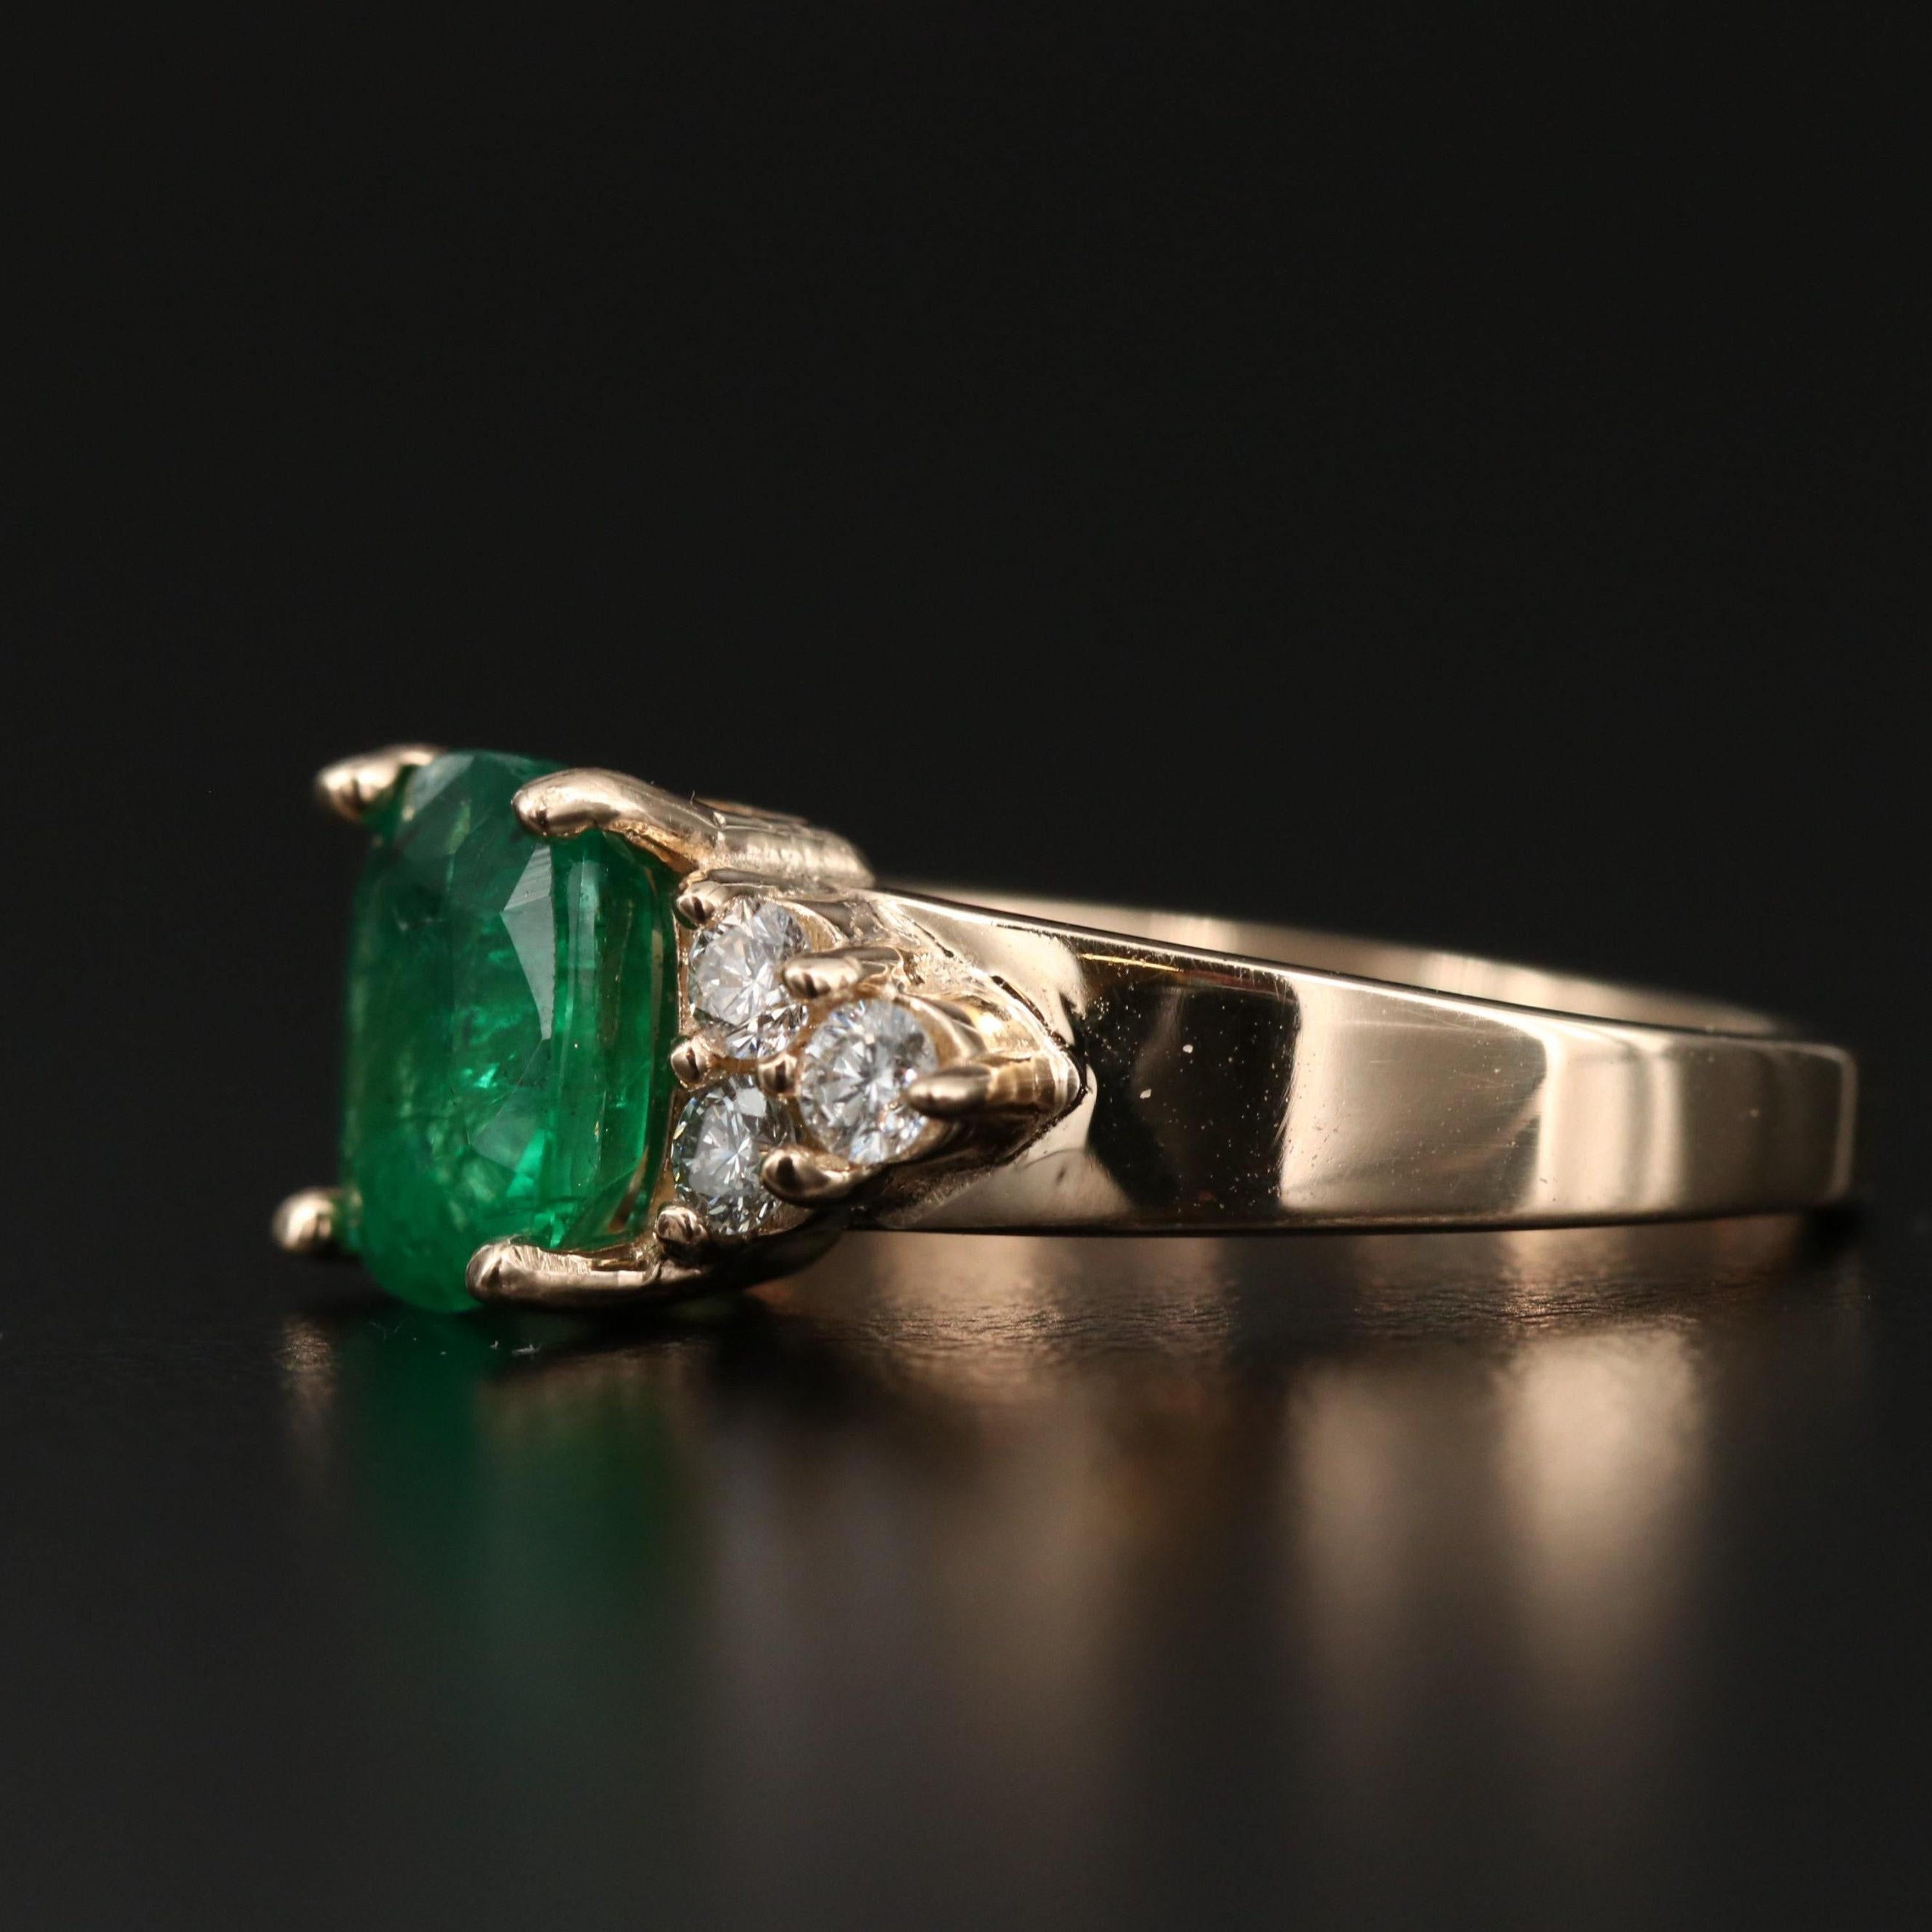 For Sale:  Minimalist Cushion Cut Natural Emerald Diamond Engagement Ring, Promise Ring 2